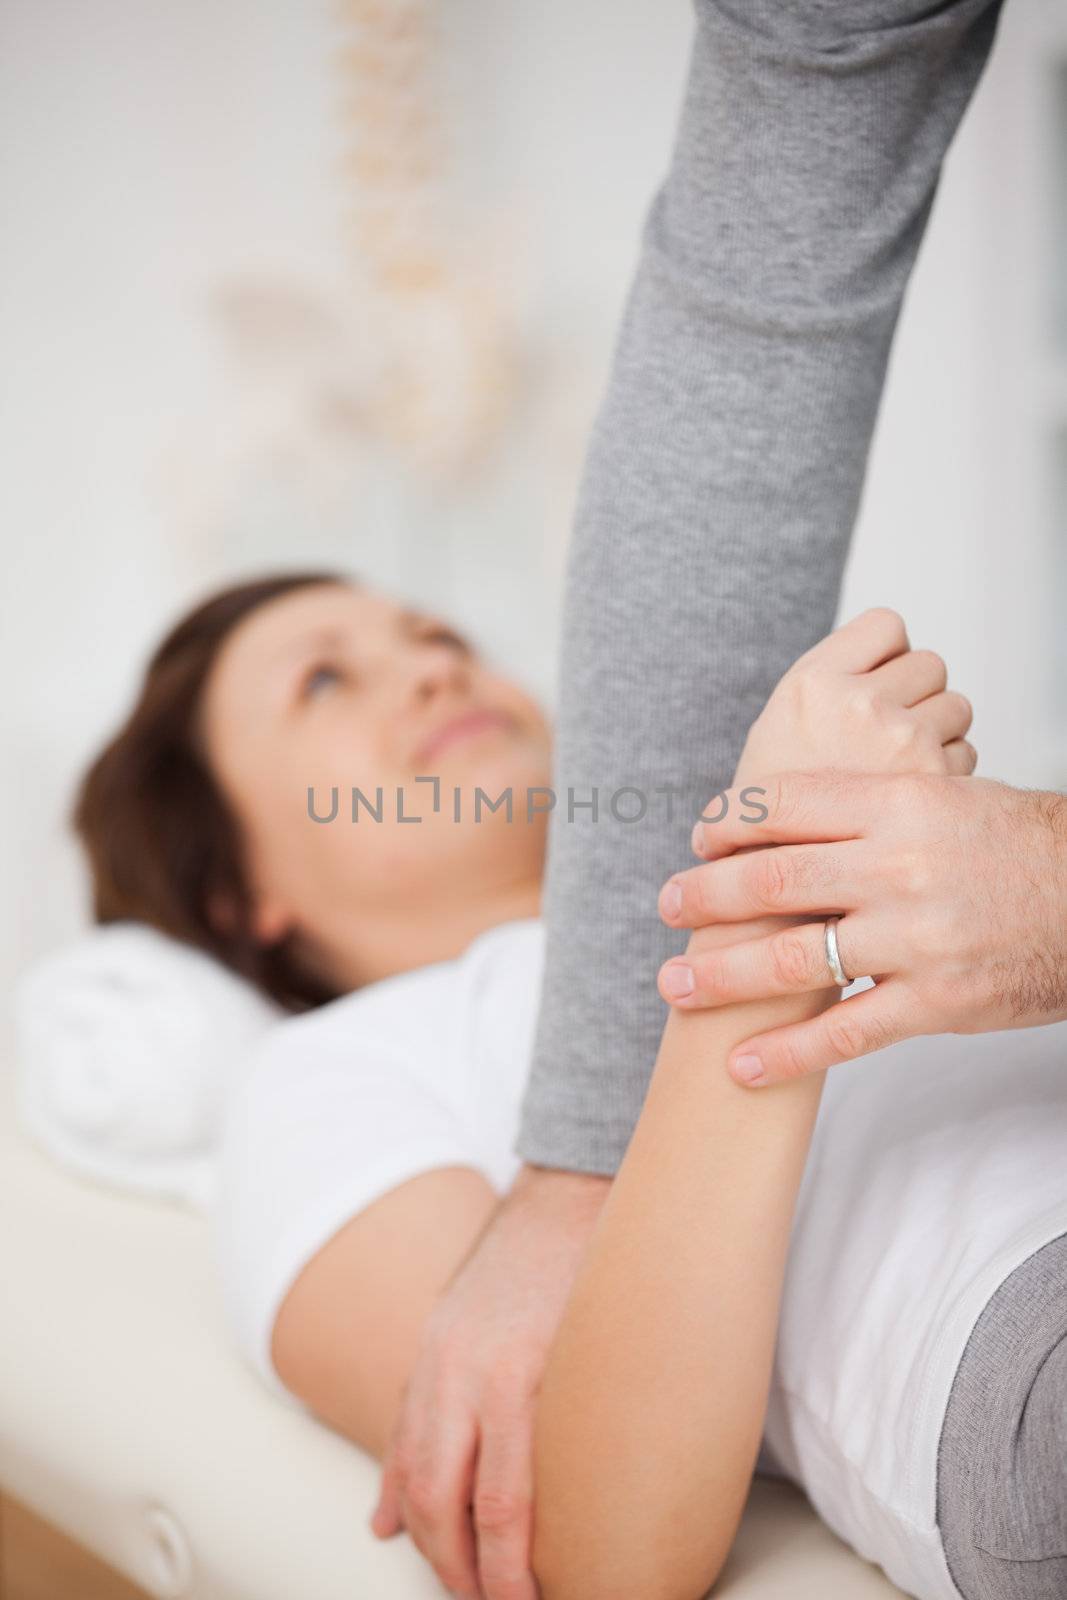 Physiotherapist manipulating the arm of a patient in a room